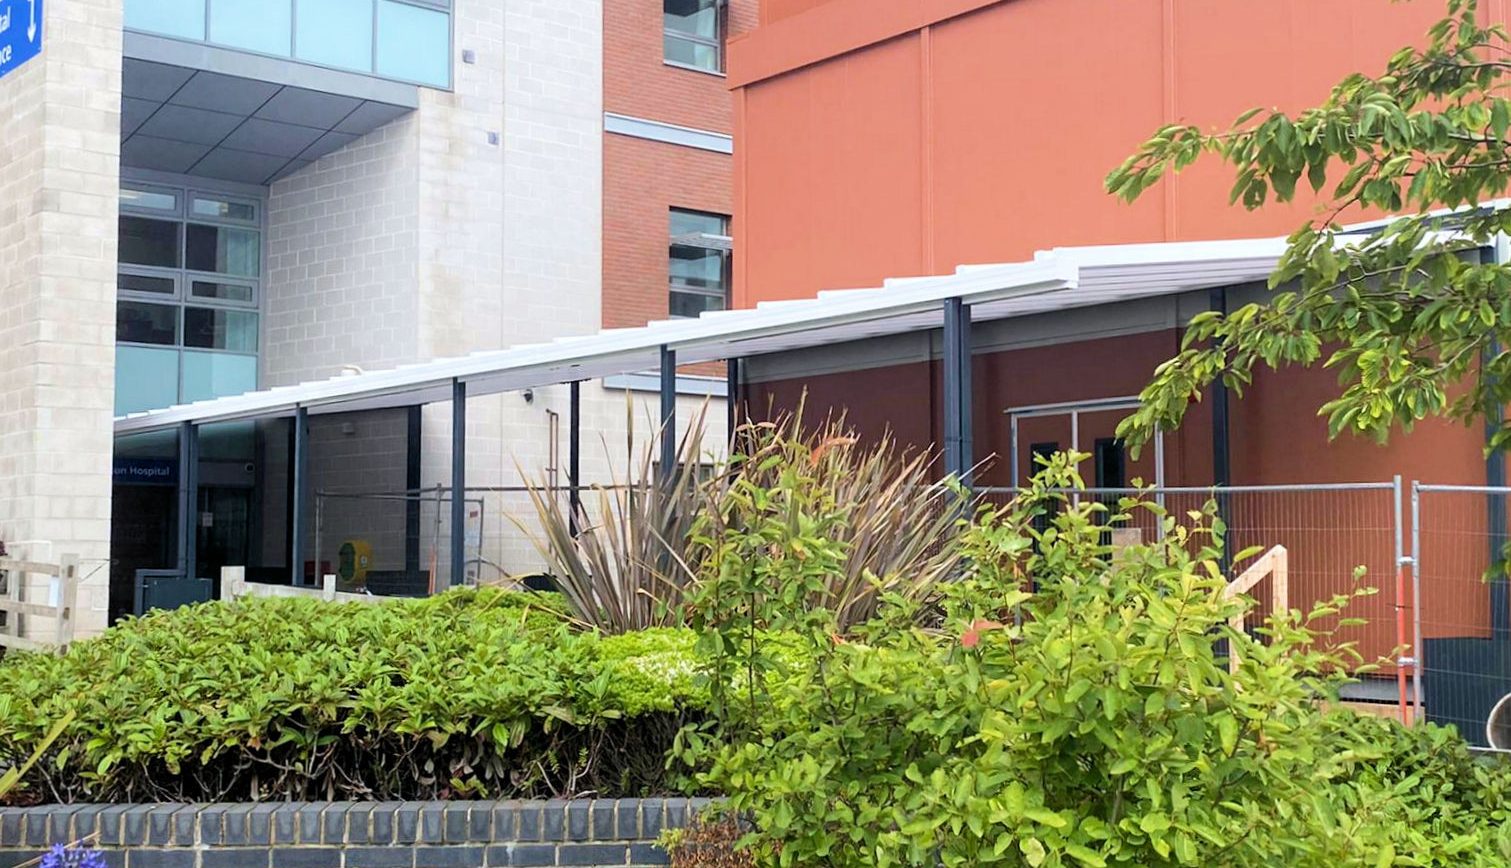 Whiston Hospital – Wall Mounted Canopy